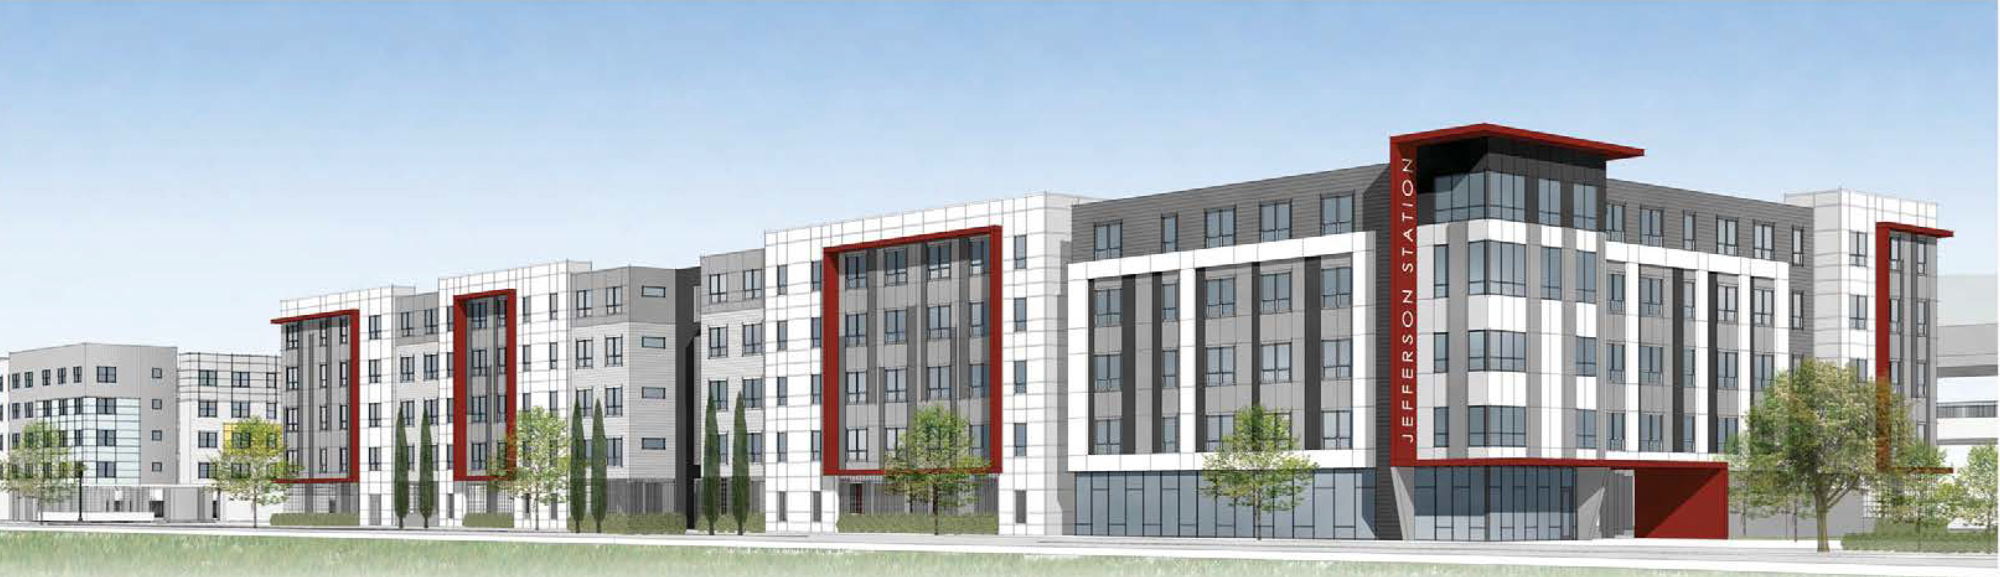 Lofts at Jefferson Station is proposed between West Bay and Water streets next to the Lofts at LaVilla.